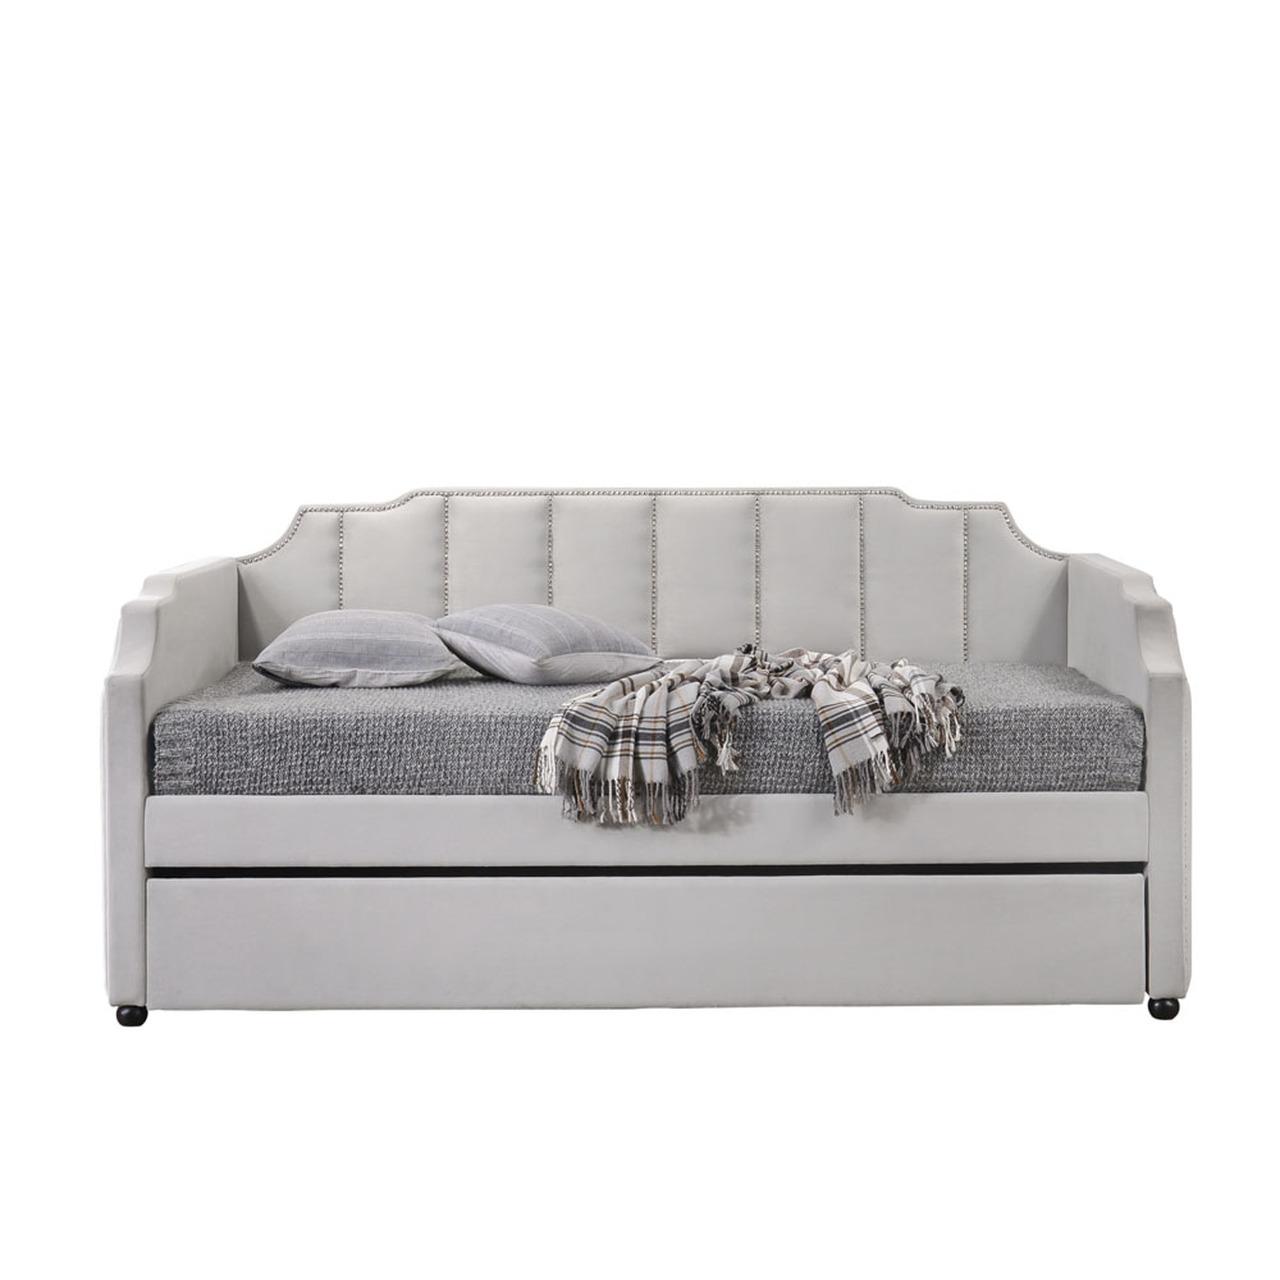 Traditional, Vintage Daybed w/ trundle Peridot 39410 in Light Gray 